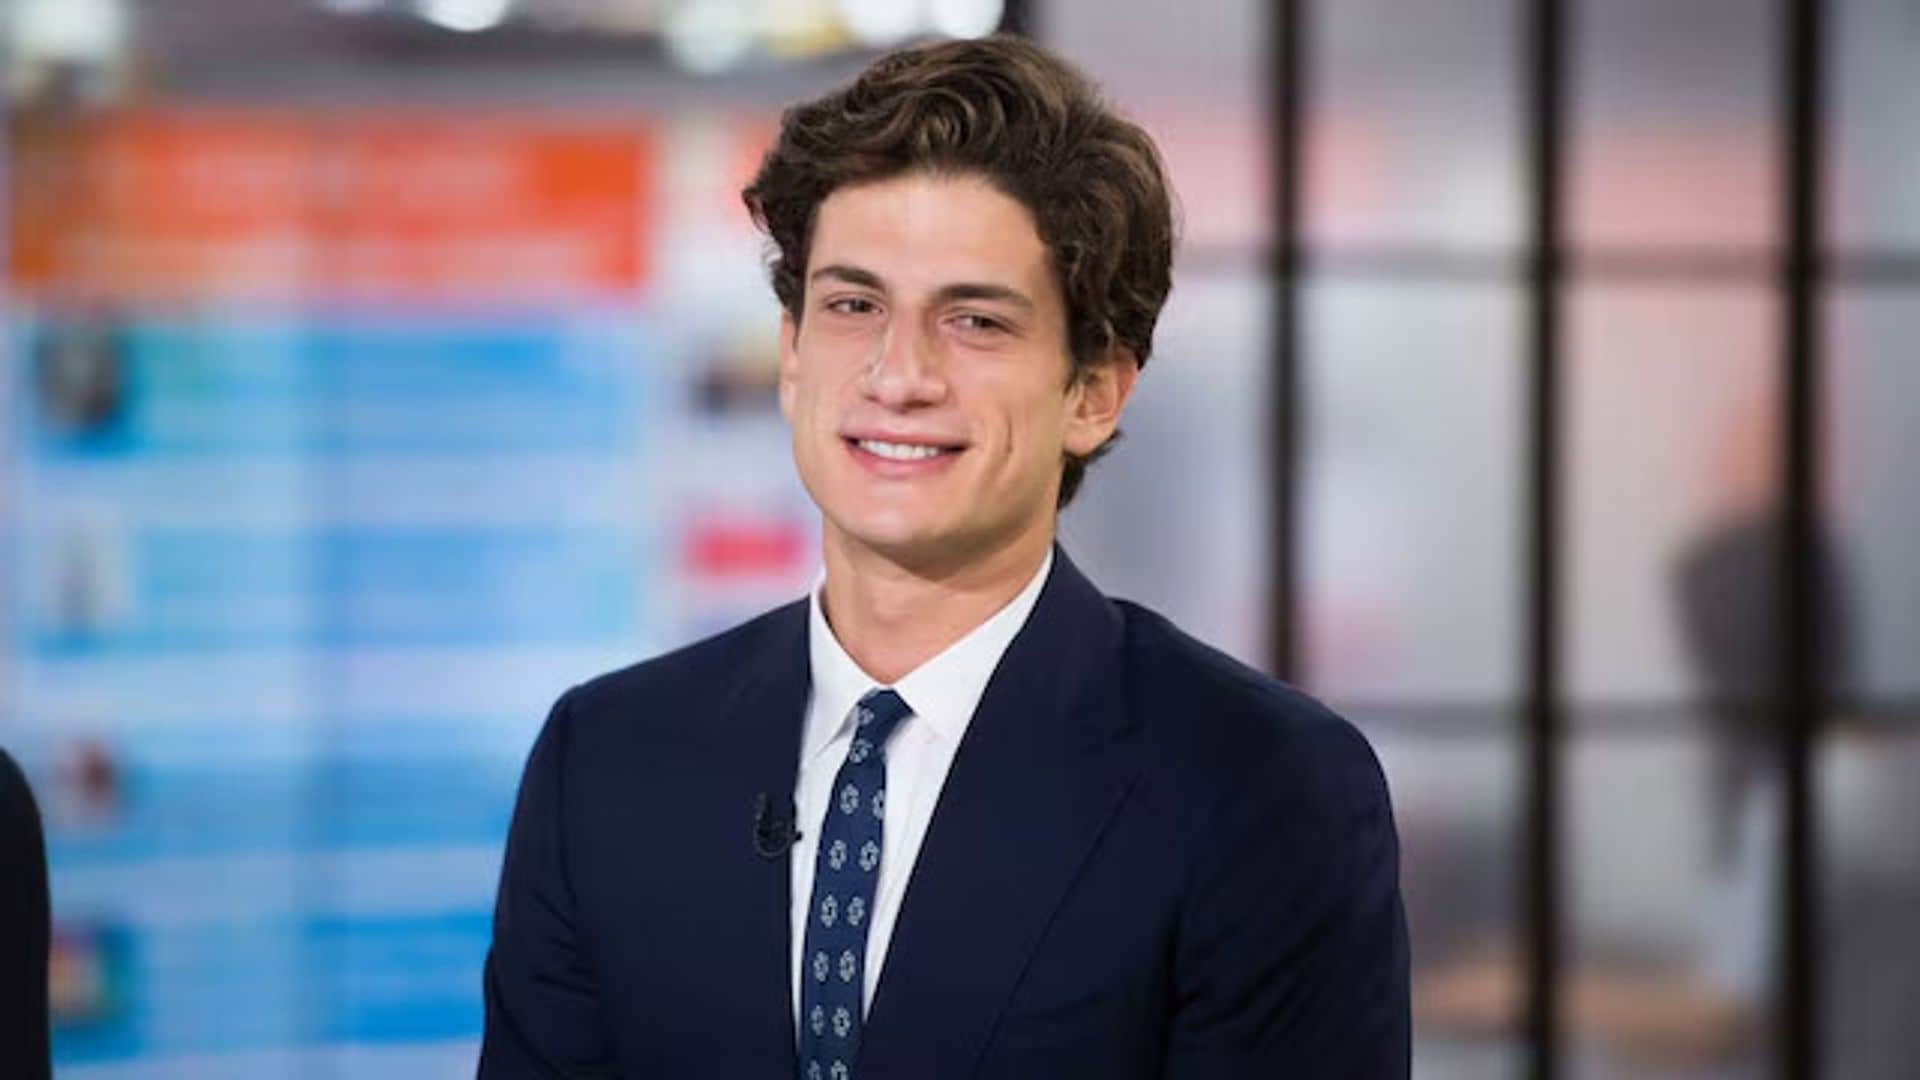 JFK’s grandson, Jack Schlossberg is turning heads for his looks and "big dreams"